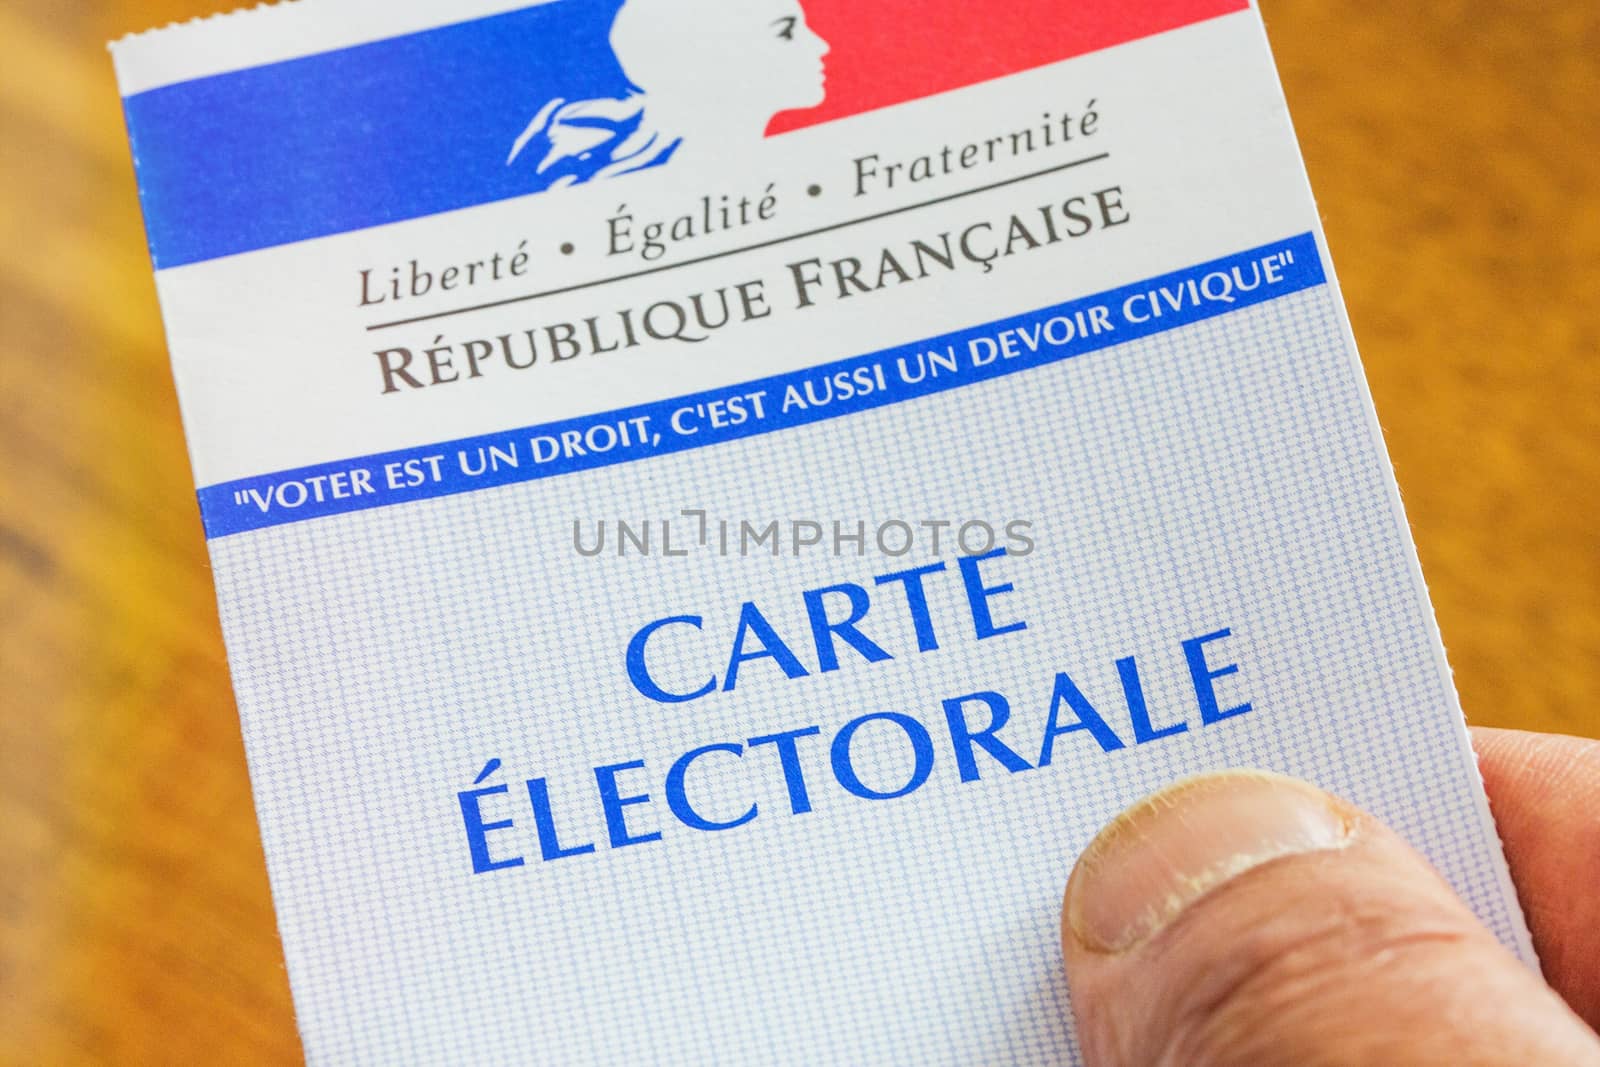 French electoral card for 2017 presidential and legislatives elections